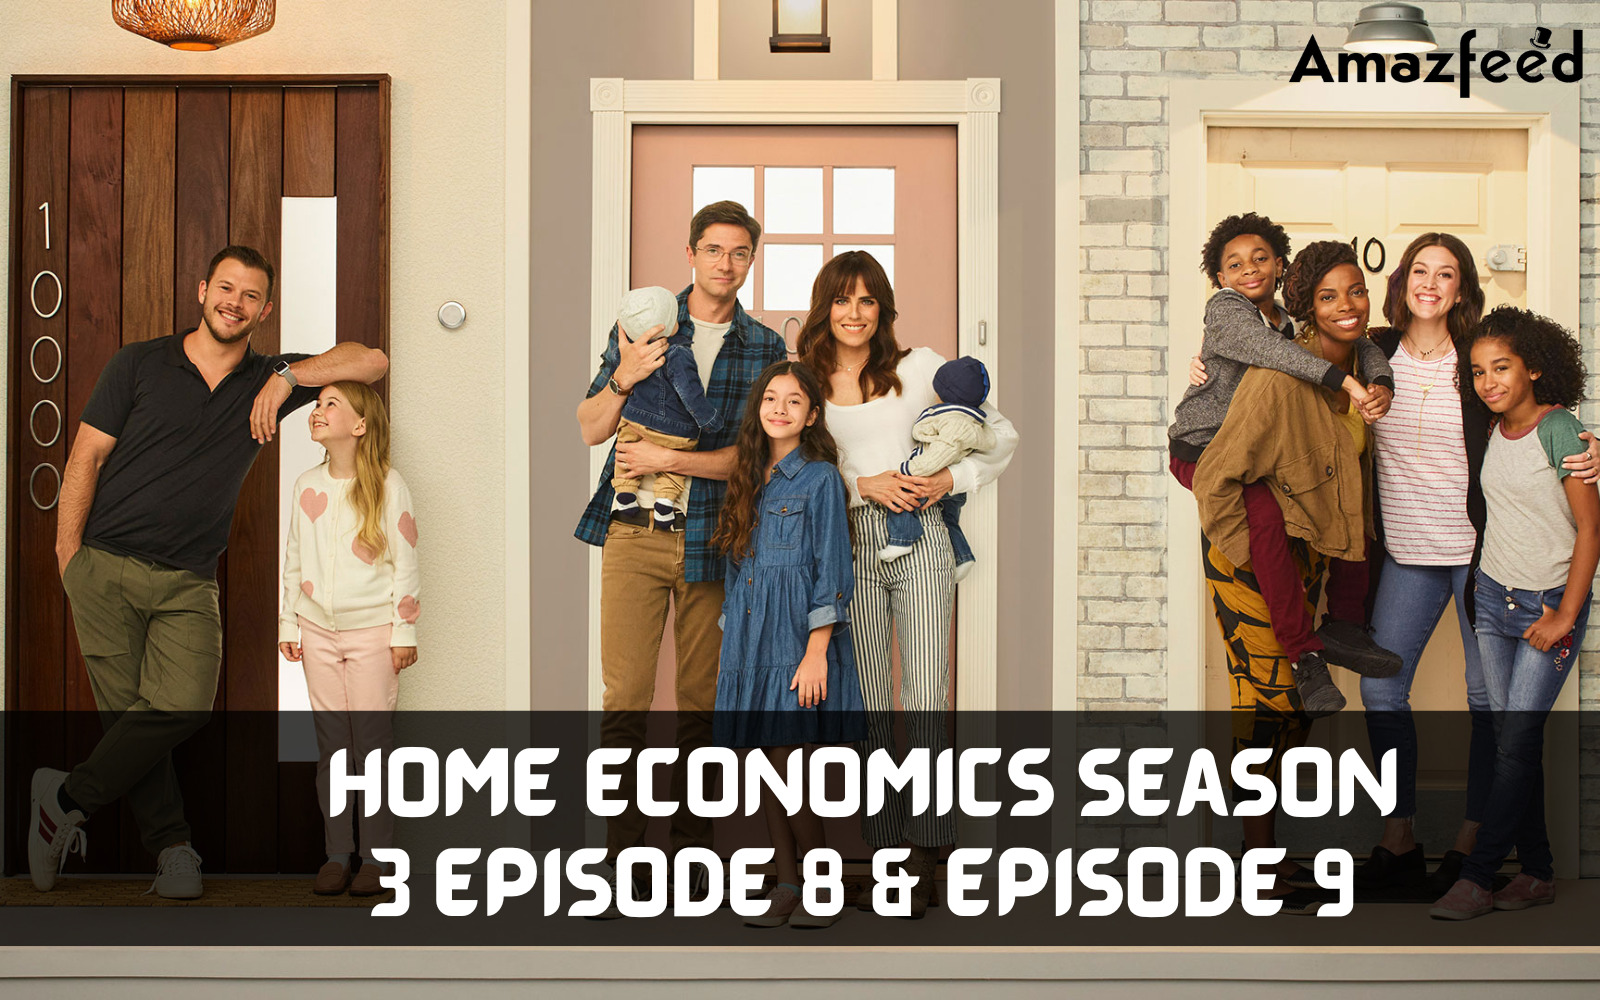 When Is Home Economics season 3 Episode 8 & Episode 9 Coming Out (Release Date)